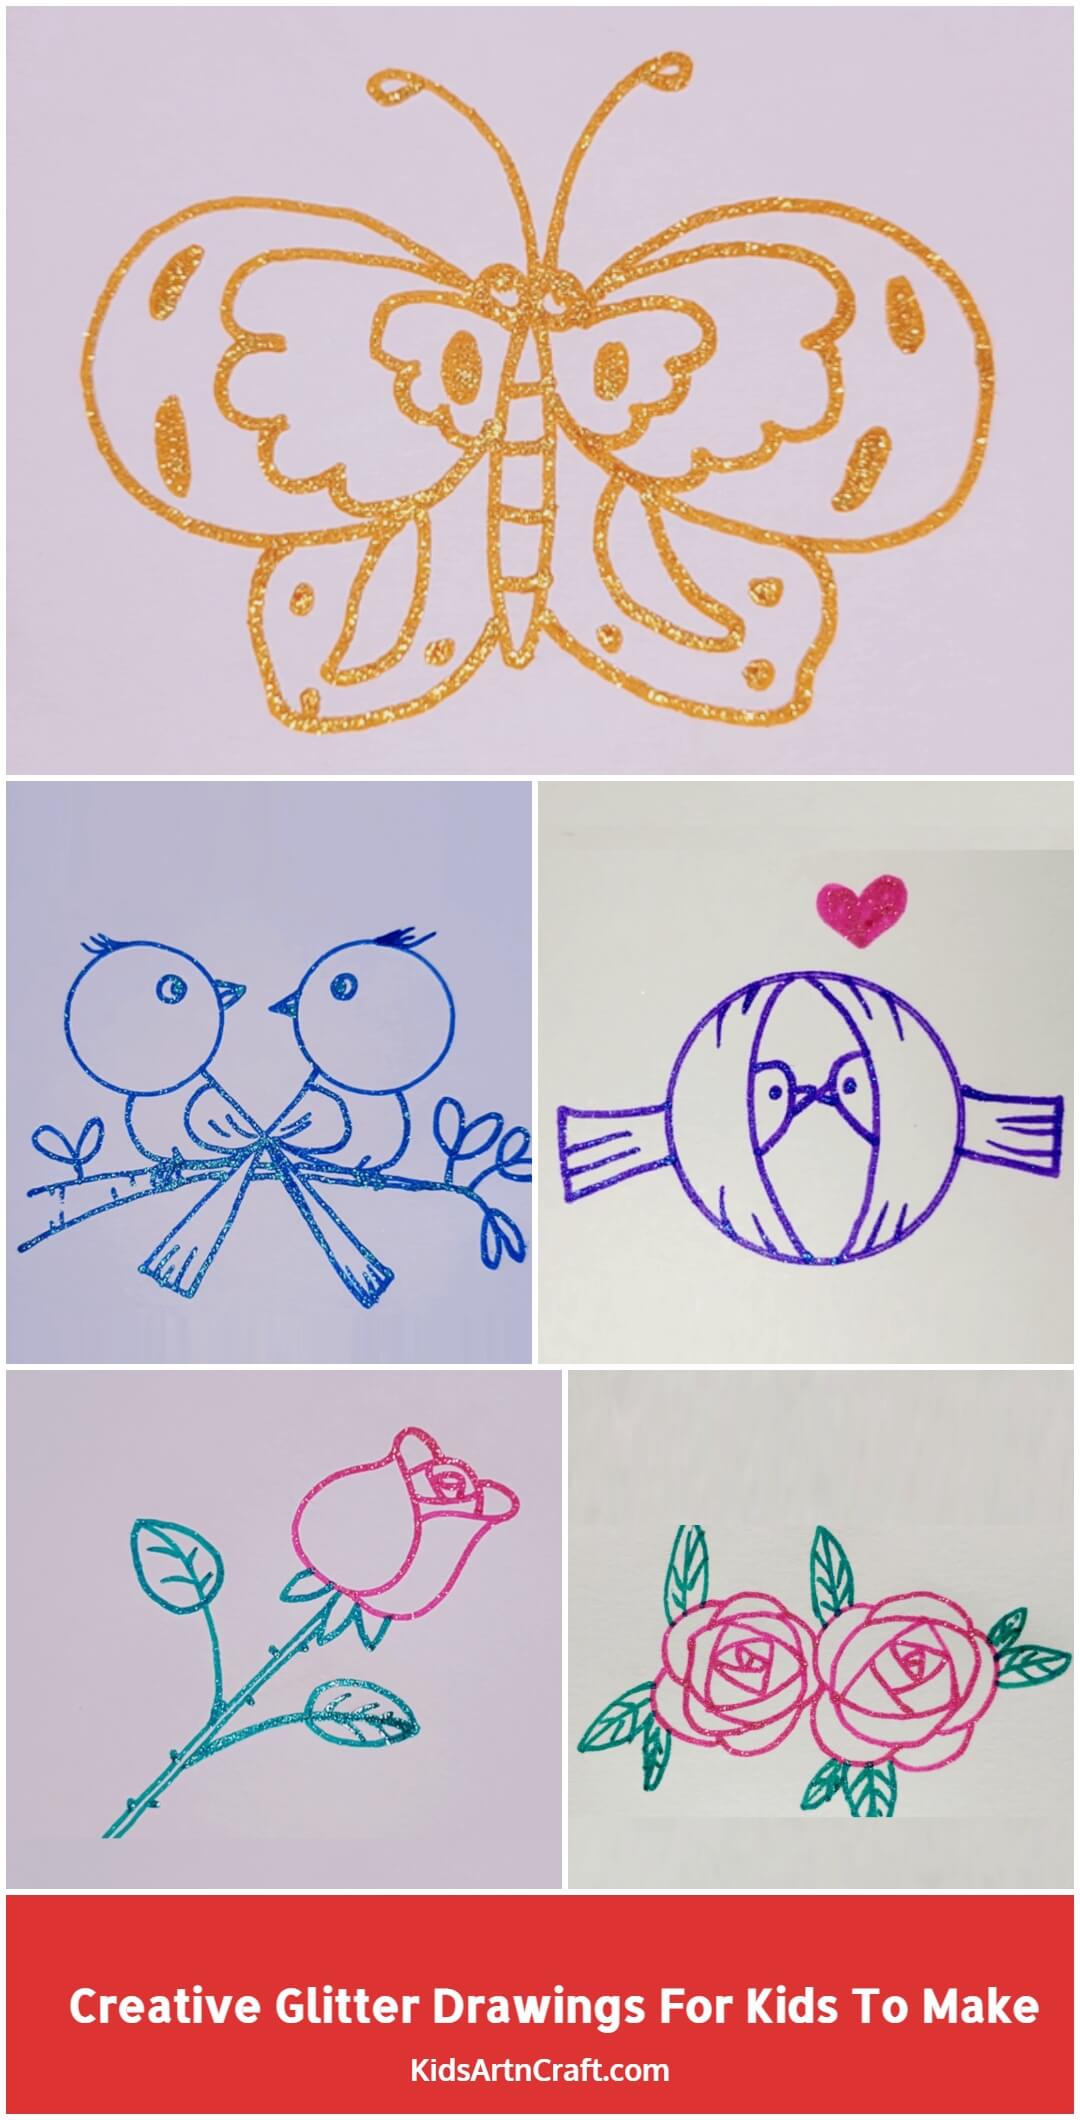 Creative Glitter Drawings For Kids To Make